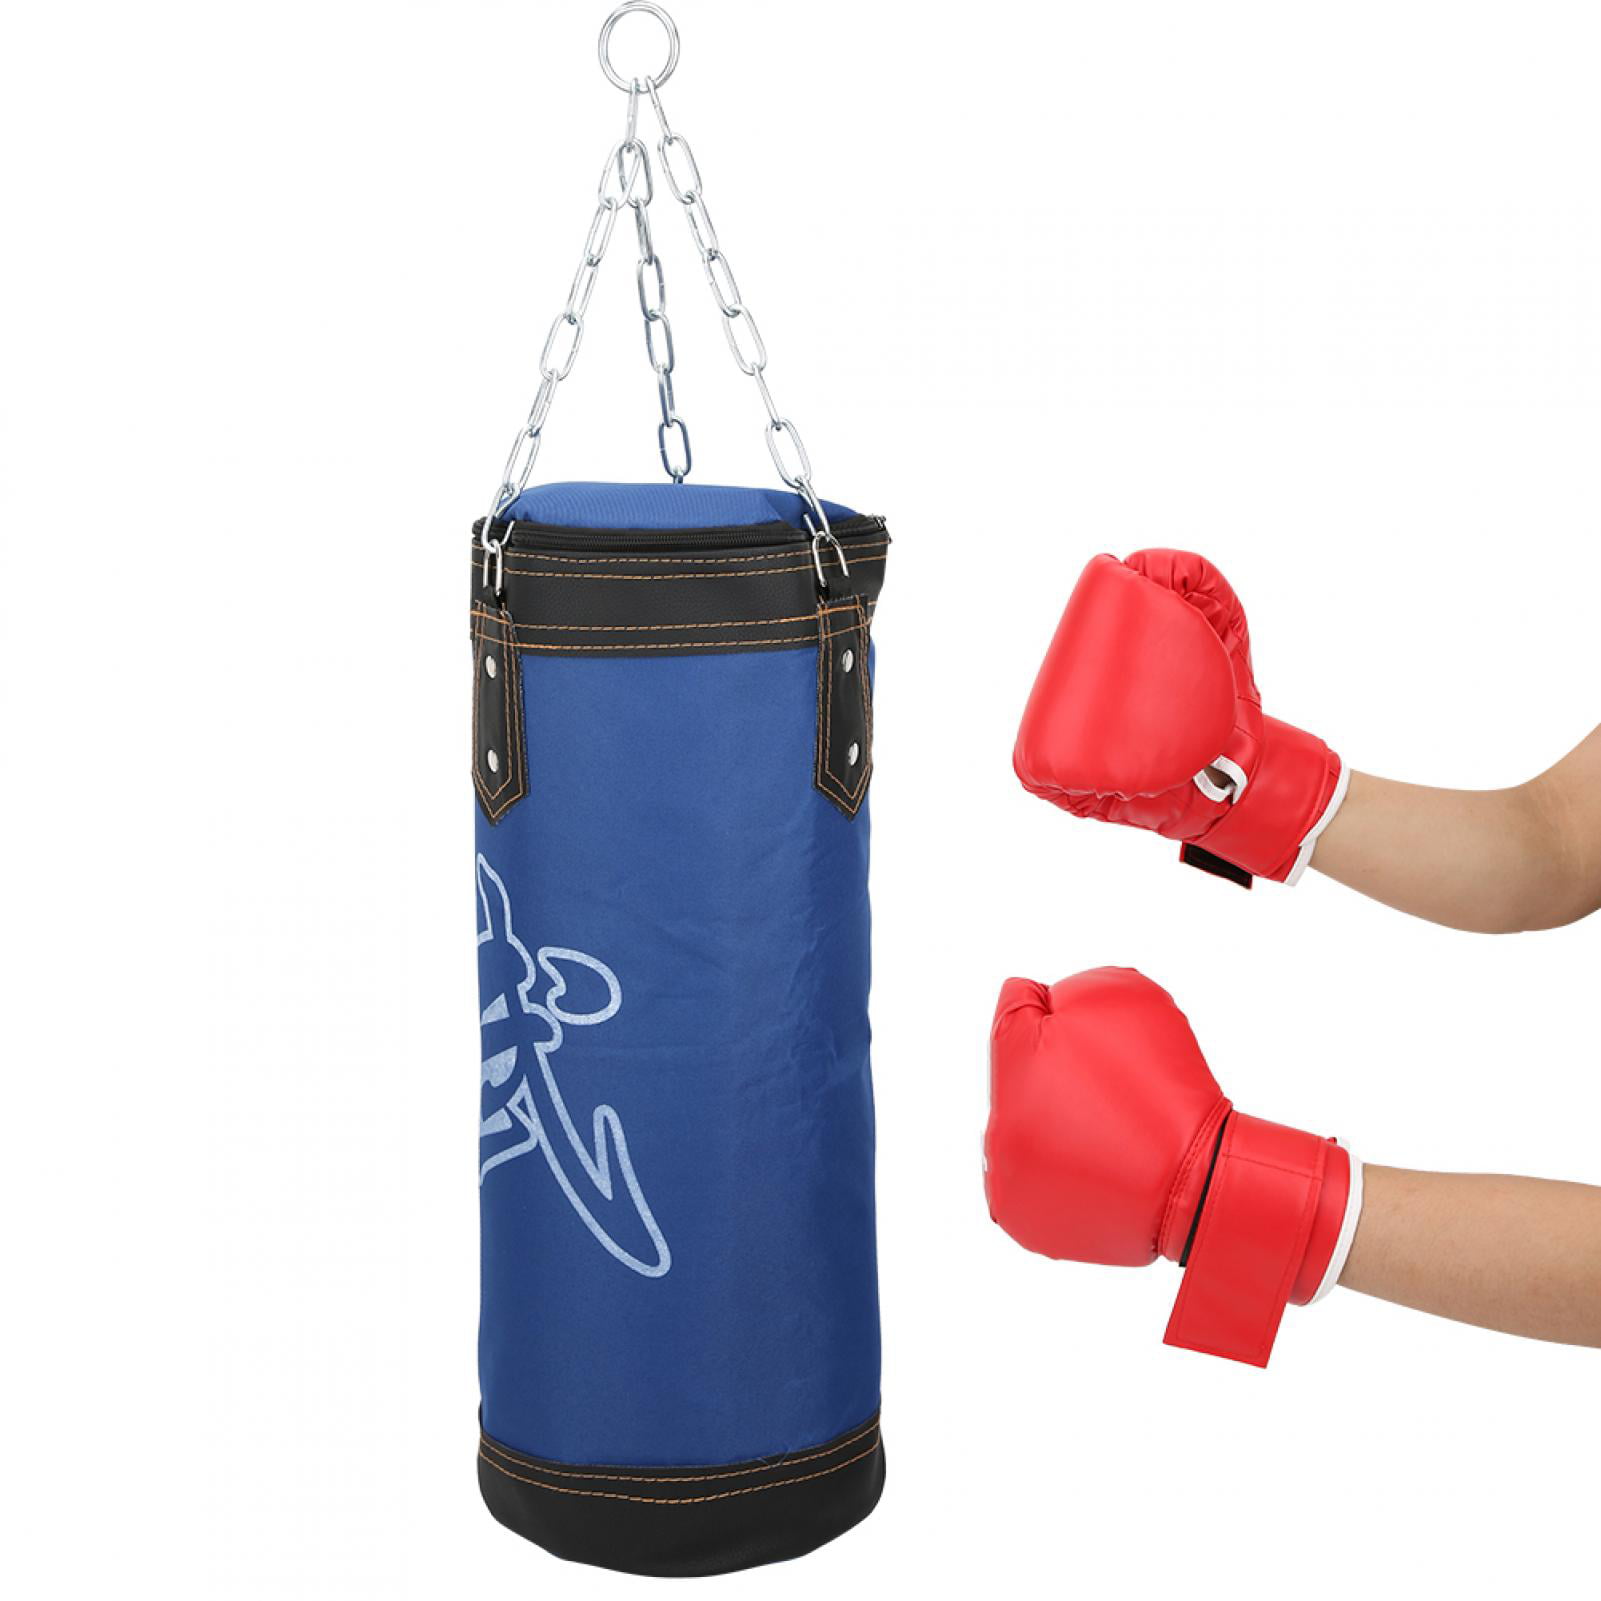 Black Hollow Hanging for Teenagers and Adults Training Bag with Chains Home Sanda Fighting Taekwondo Training Equipment Sandbags Boxing Heavy Punching